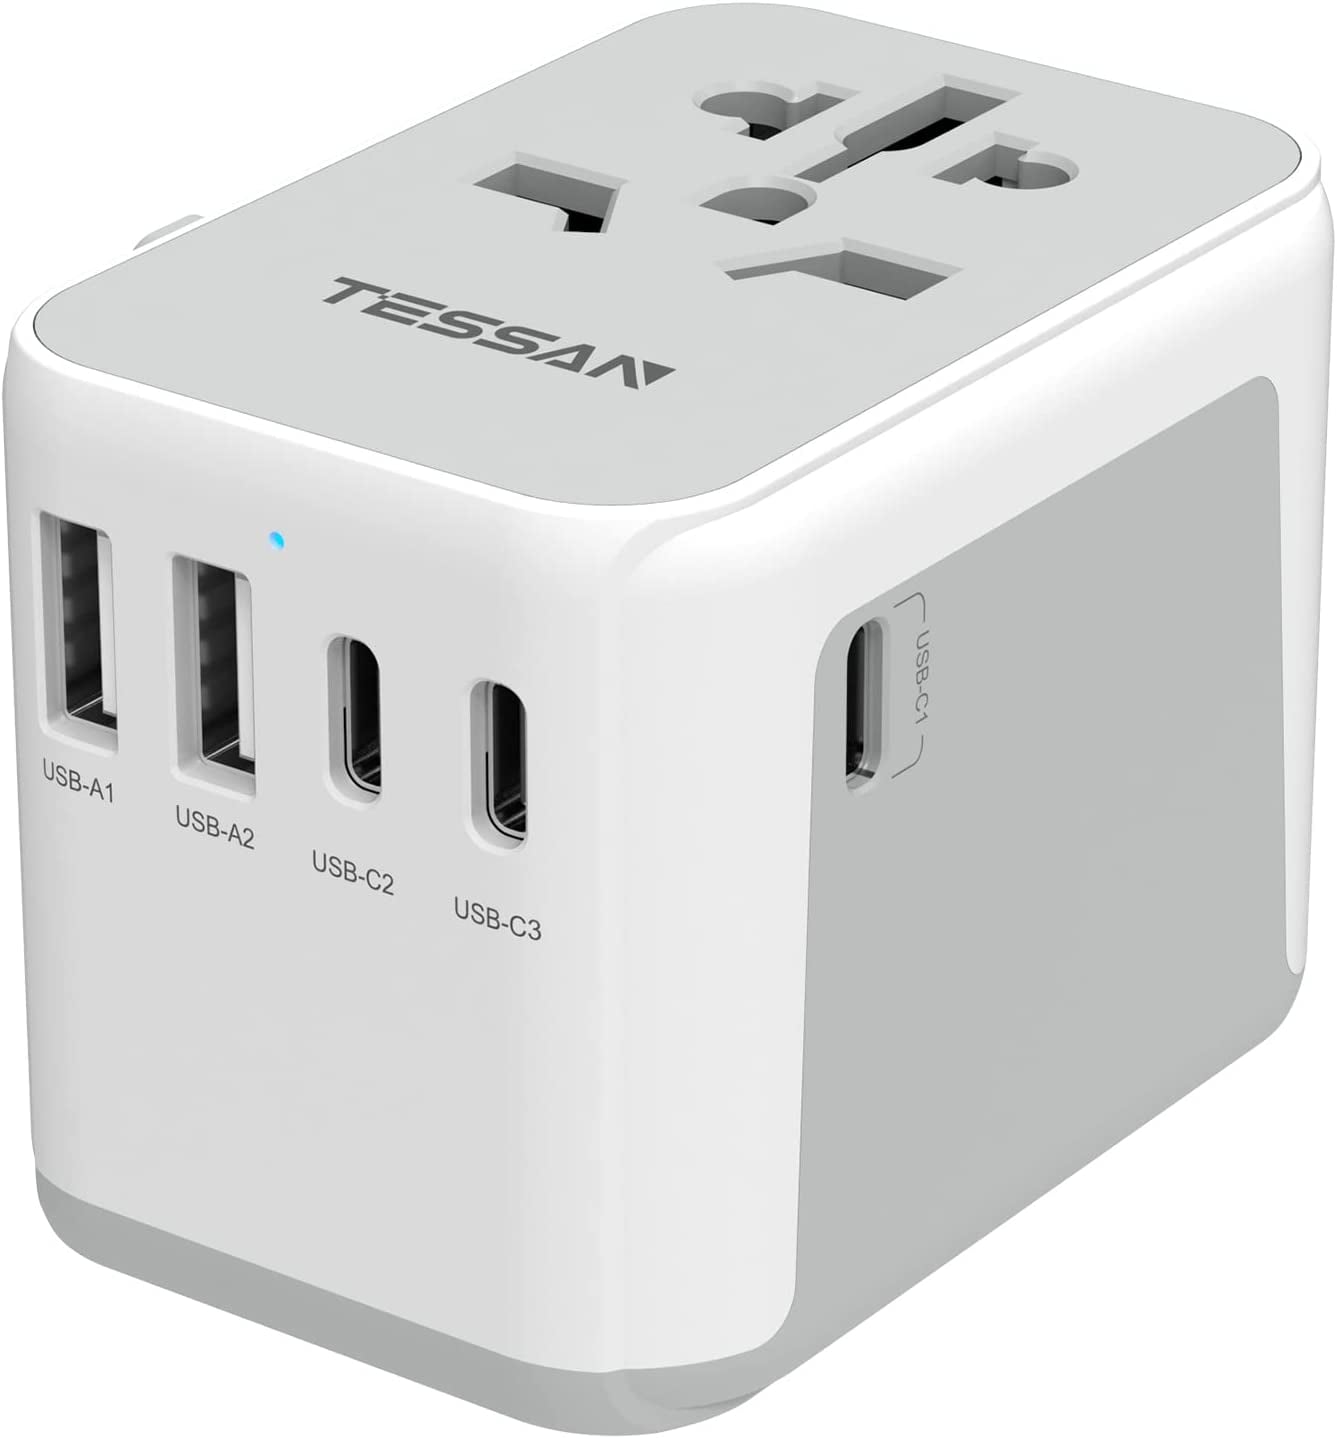 <p><a href="https://amazon.com/Universal-TESSAN-International-Worldwide-Converter/dp/B0B2PD7VW4">BUY NOW</a></p><p>$23</p><p><a href="https://amazon.com/Universal-TESSAN-International-Worldwide-Converter/dp/B0B2PD7VW4" class="ga-track"><strong>Universal Travel Adapter</strong></a> ($23, originally $25)</p> <p>This versatile adapter is designed to work seamlessly in over 150 countries and boasts a compact size, making it highly portable. What sets it apart is its ability to accommodate multiple devices simultaneously, thanks to its five USB ports and one convertible and universal AC outlet.</p>